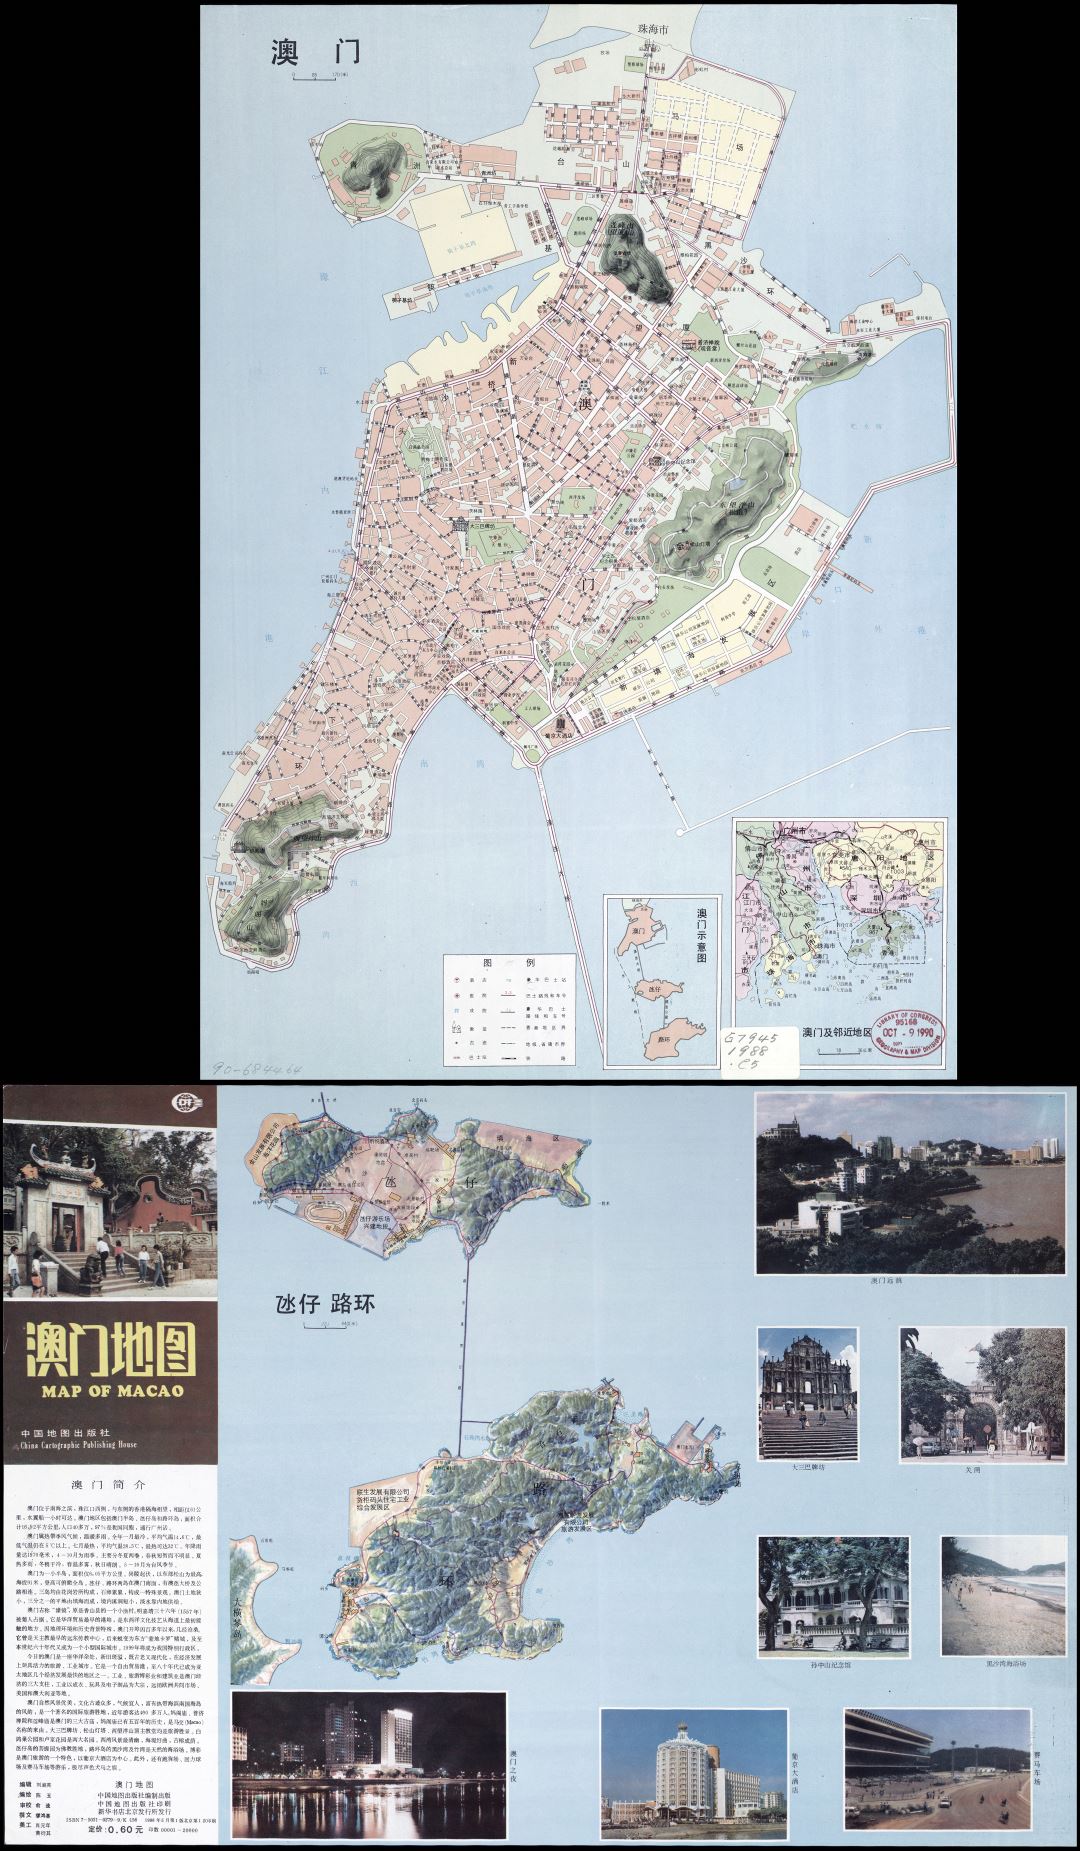 Large scale detailed tourist map of Macau in chinese - 1988